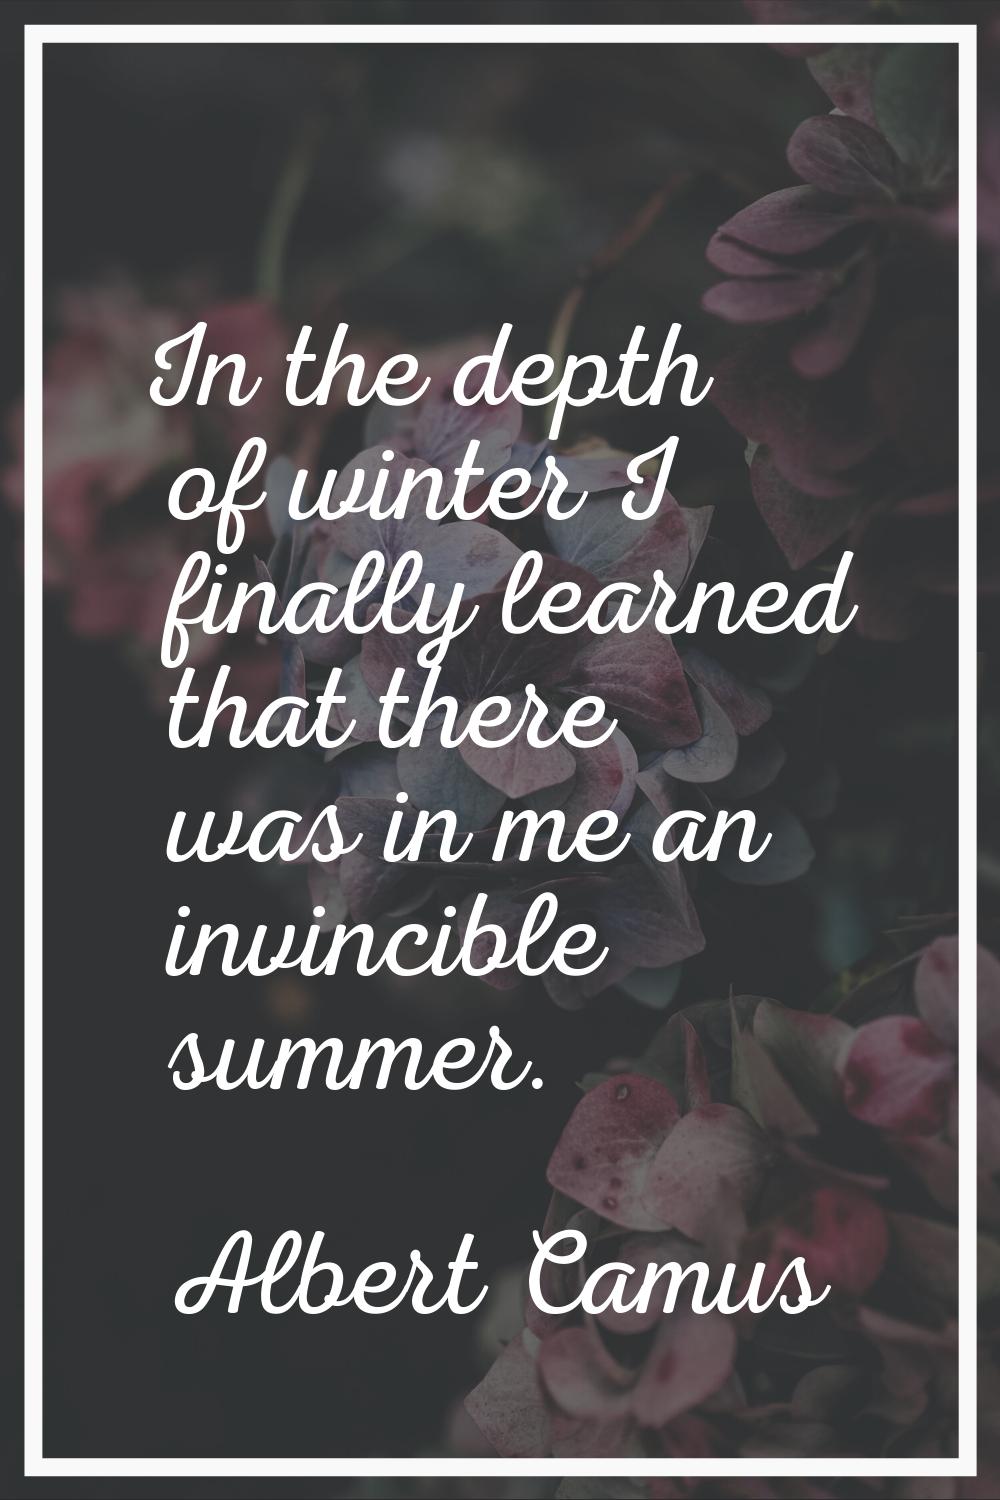 In the depth of winter I finally learned that there was in me an invincible summer.